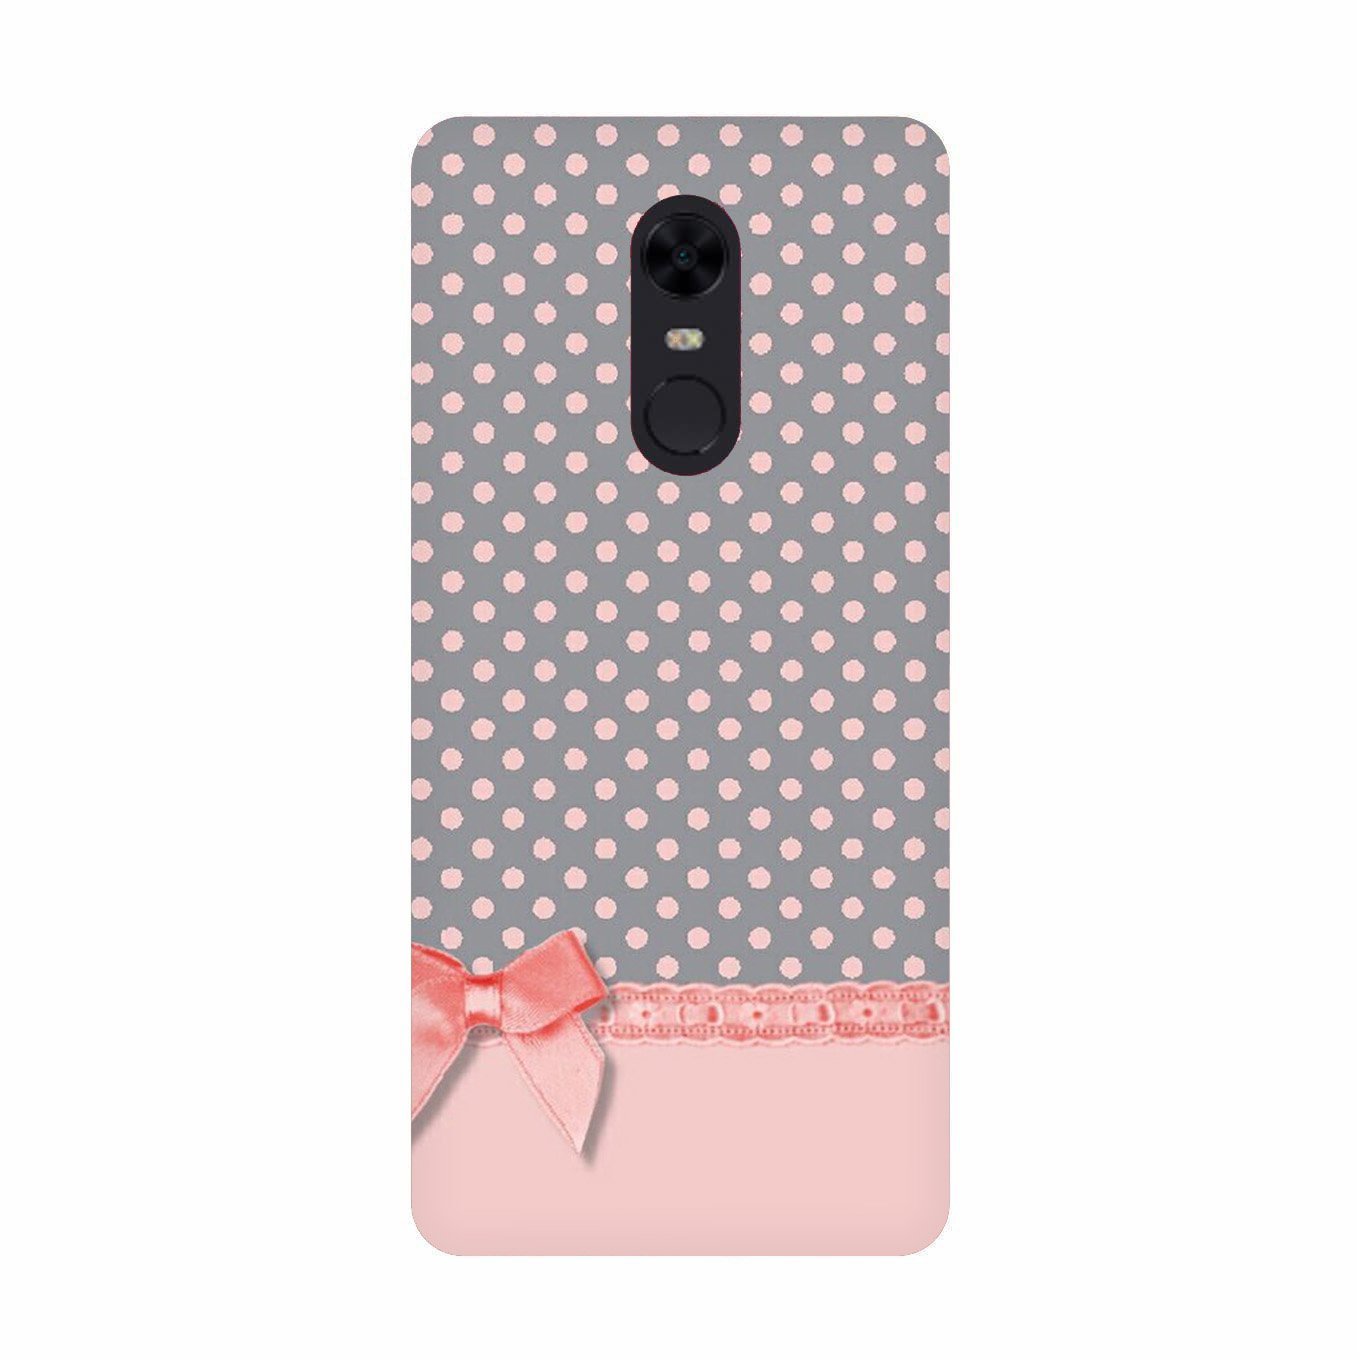 Gift Wrap2 Case for Redmi Note 5